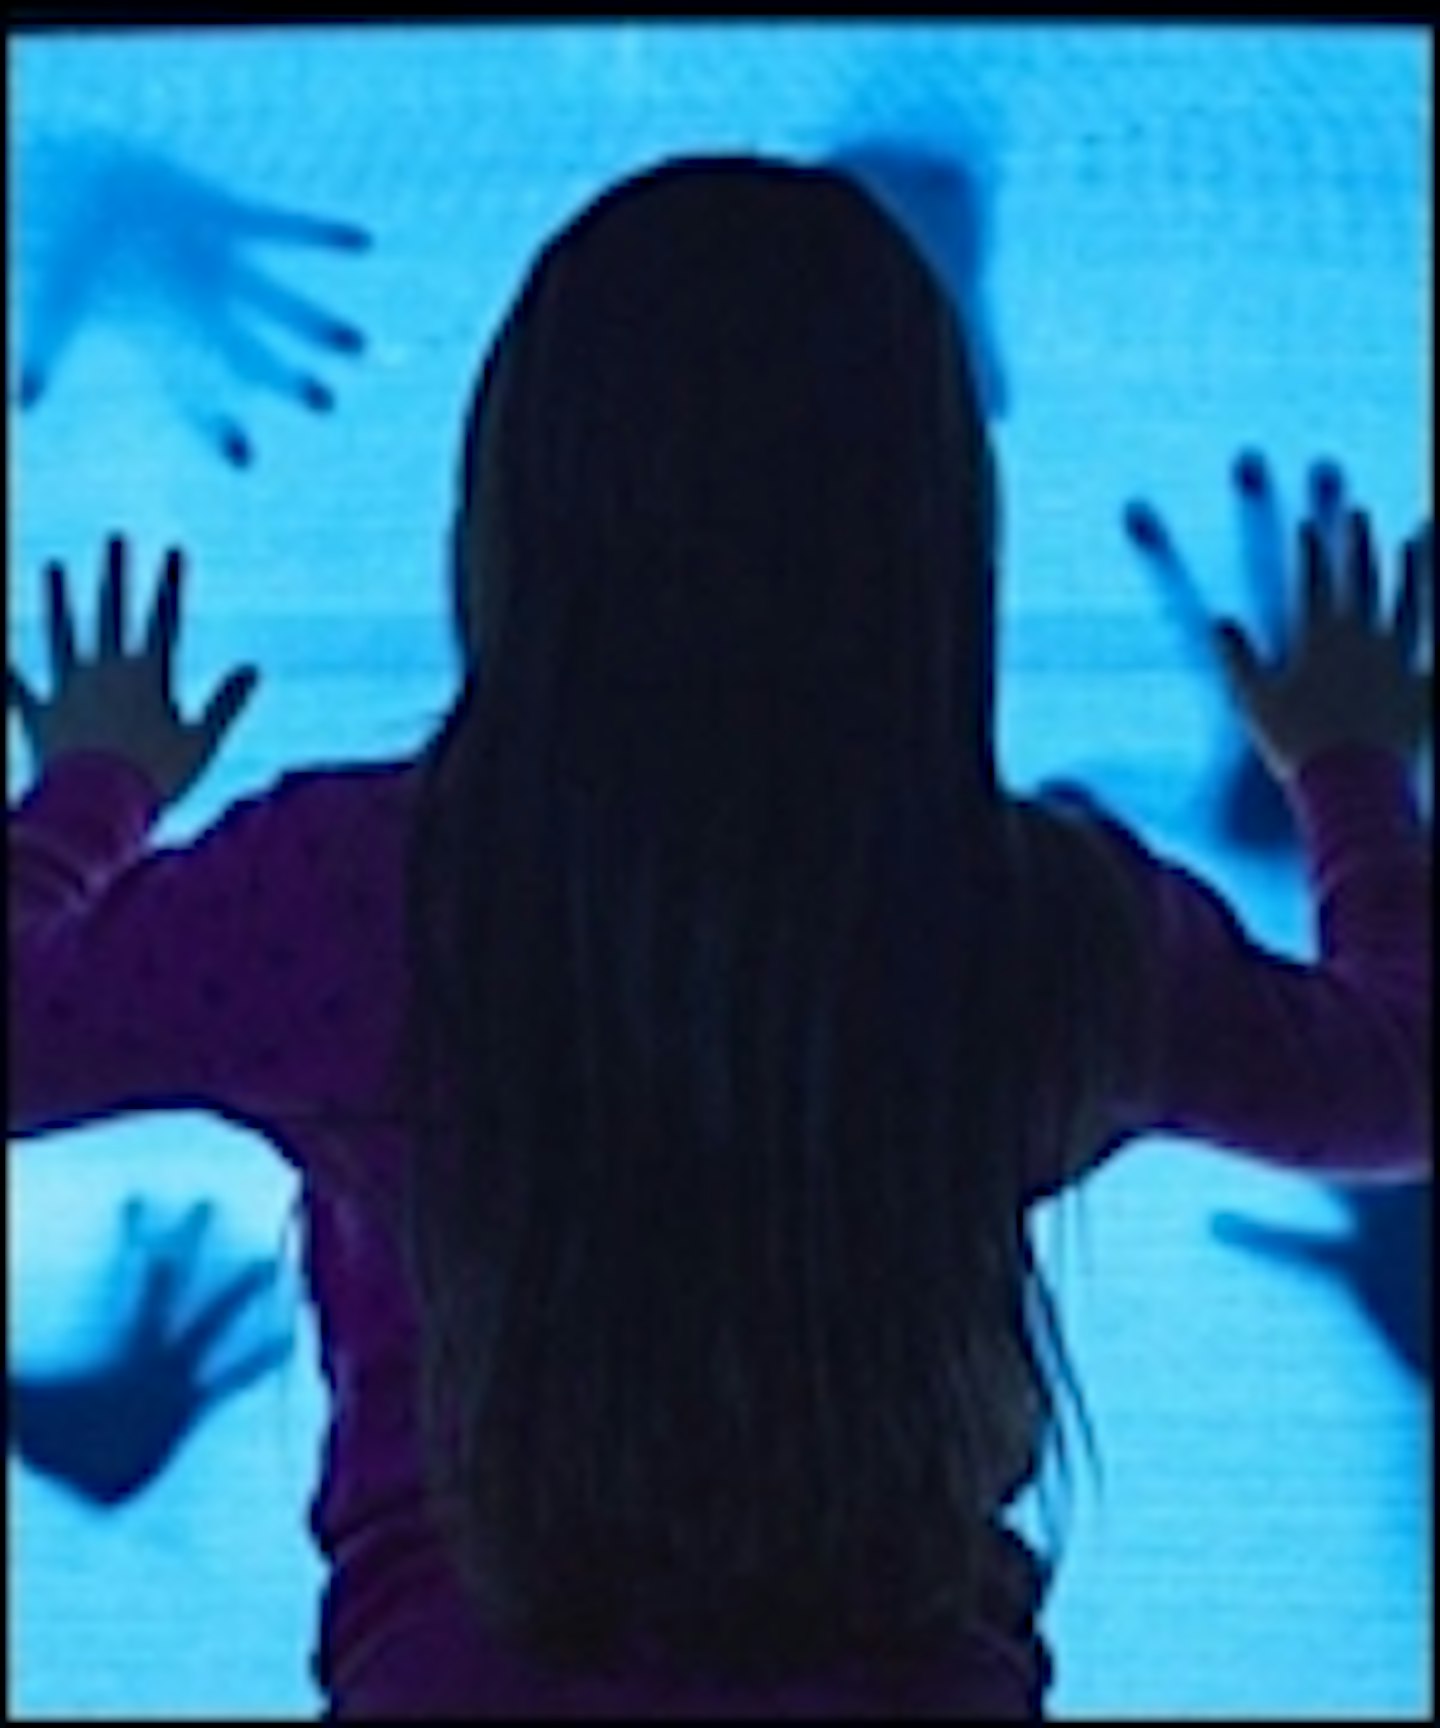 First Trailer For The Poltergeist Reboot